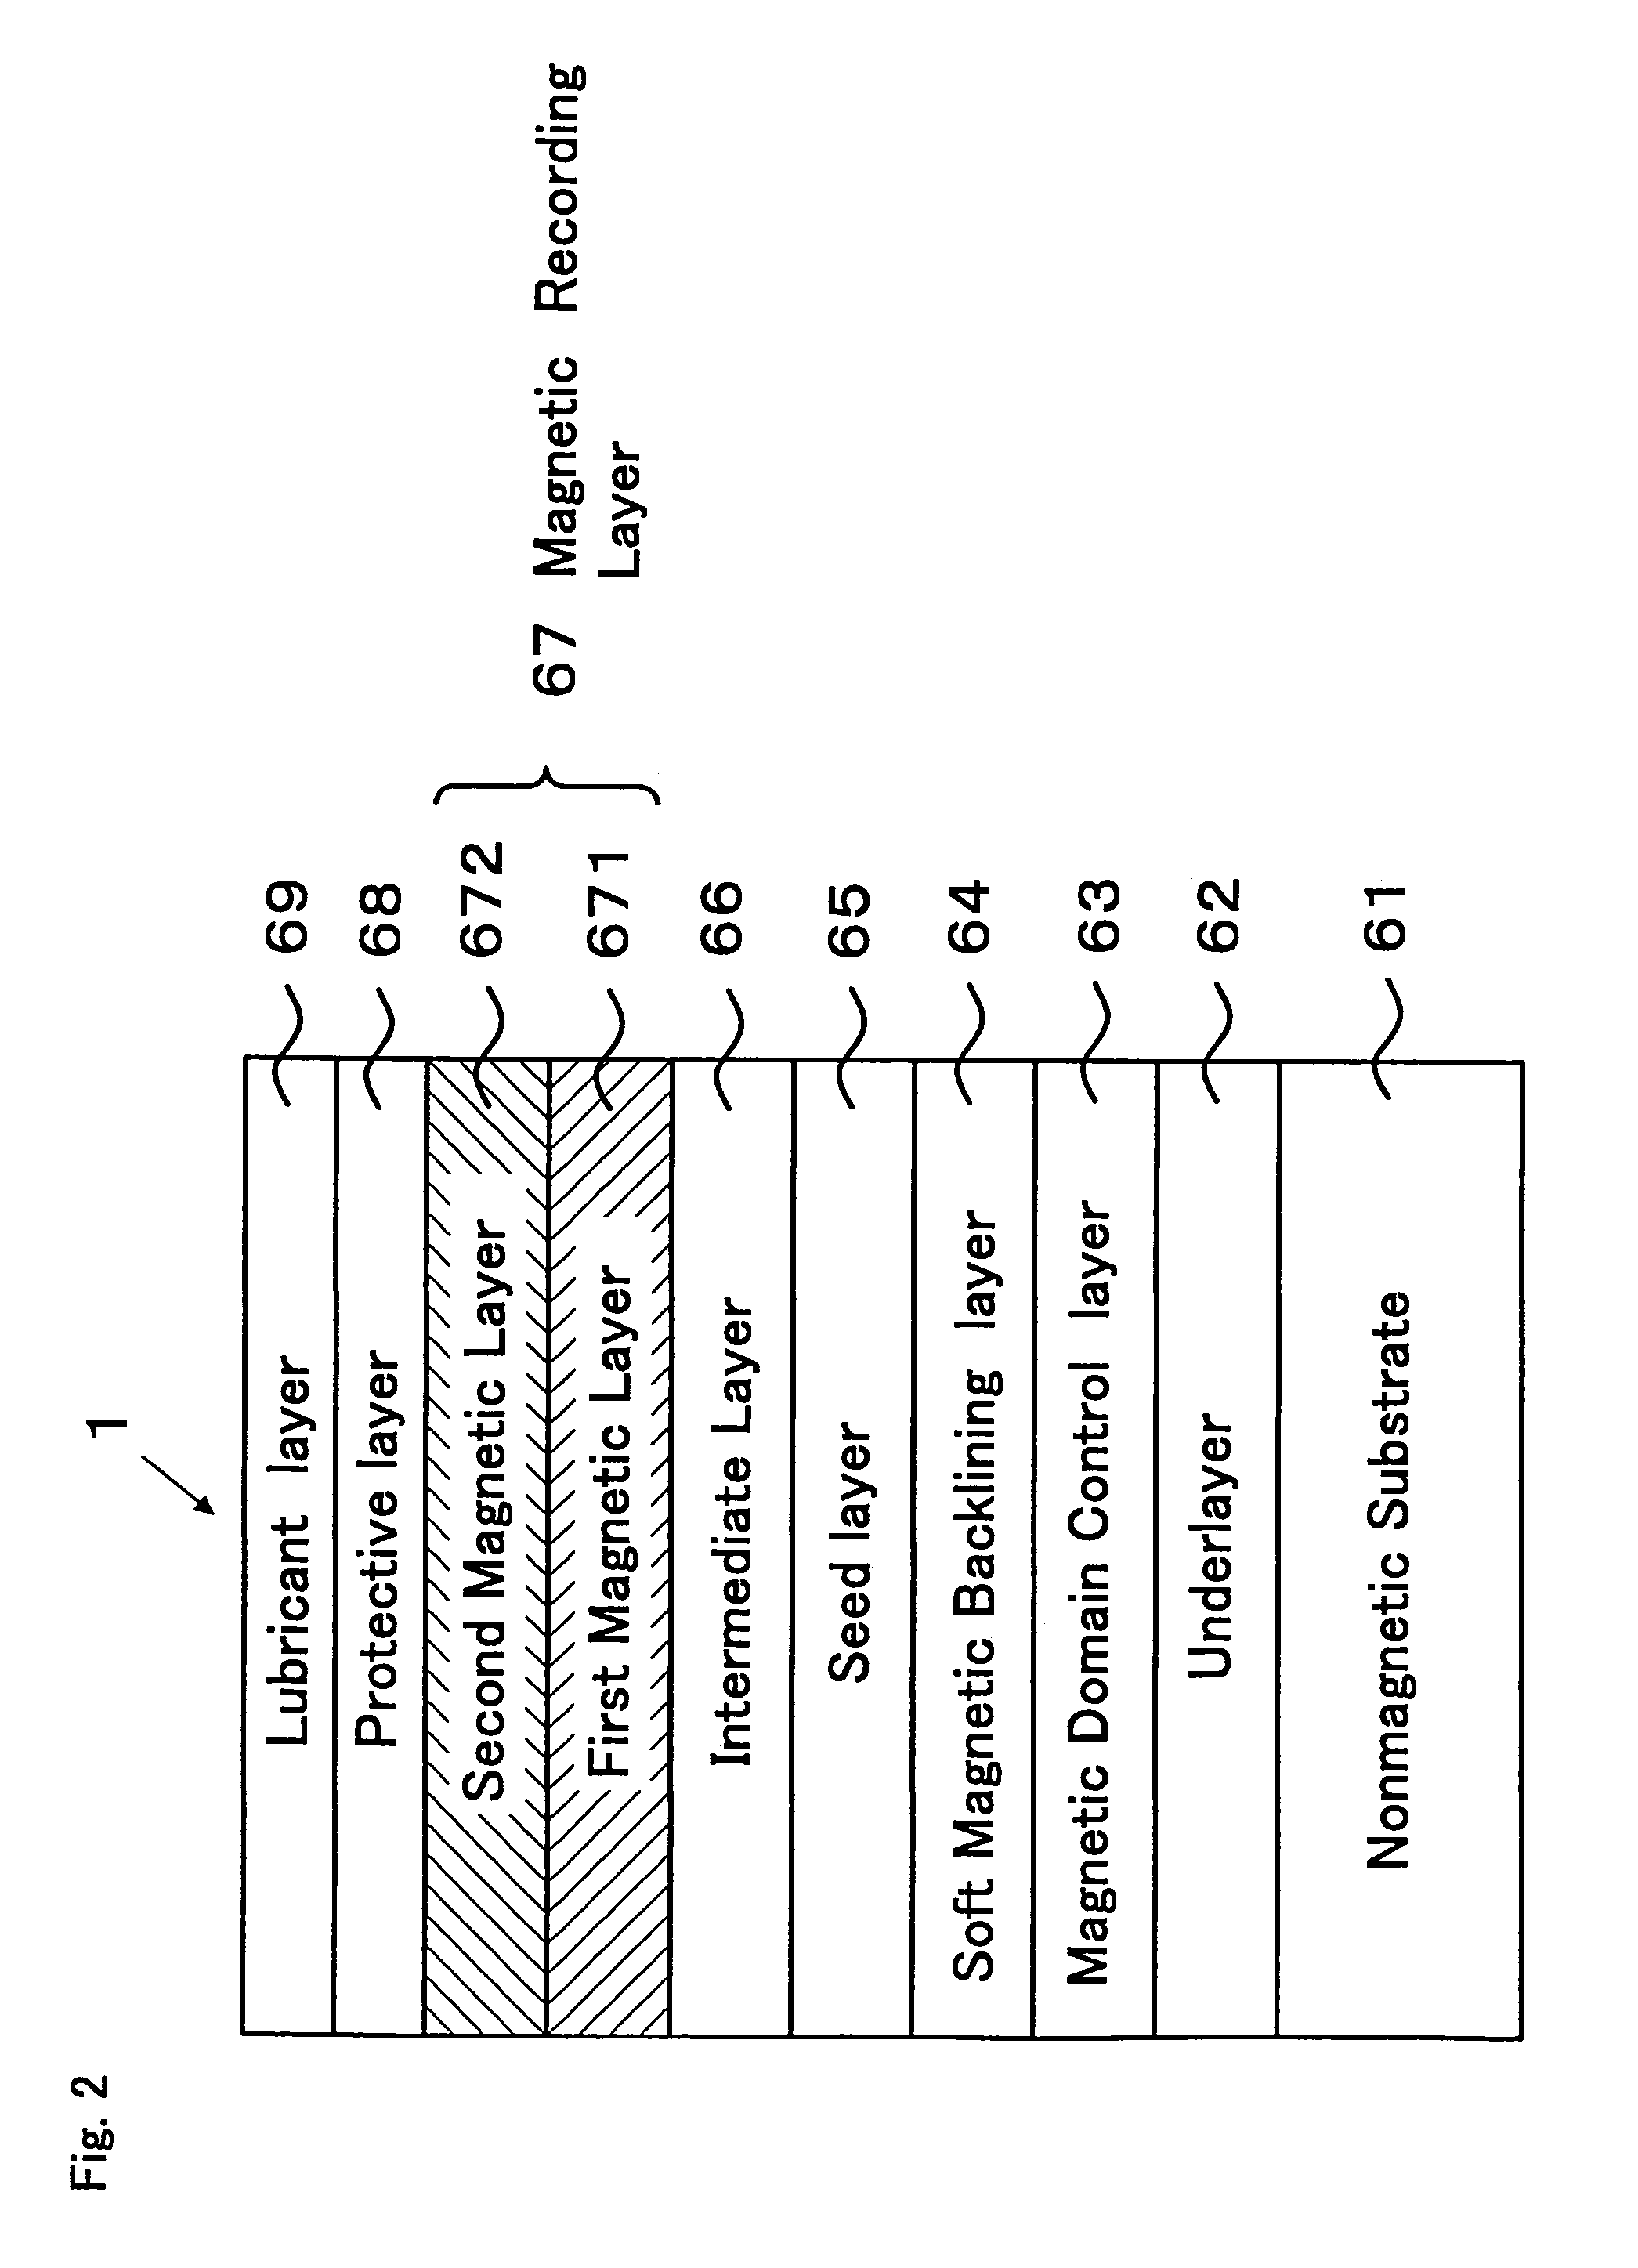 Perpendicular magnetic recording medium and a method for manufacturing the same